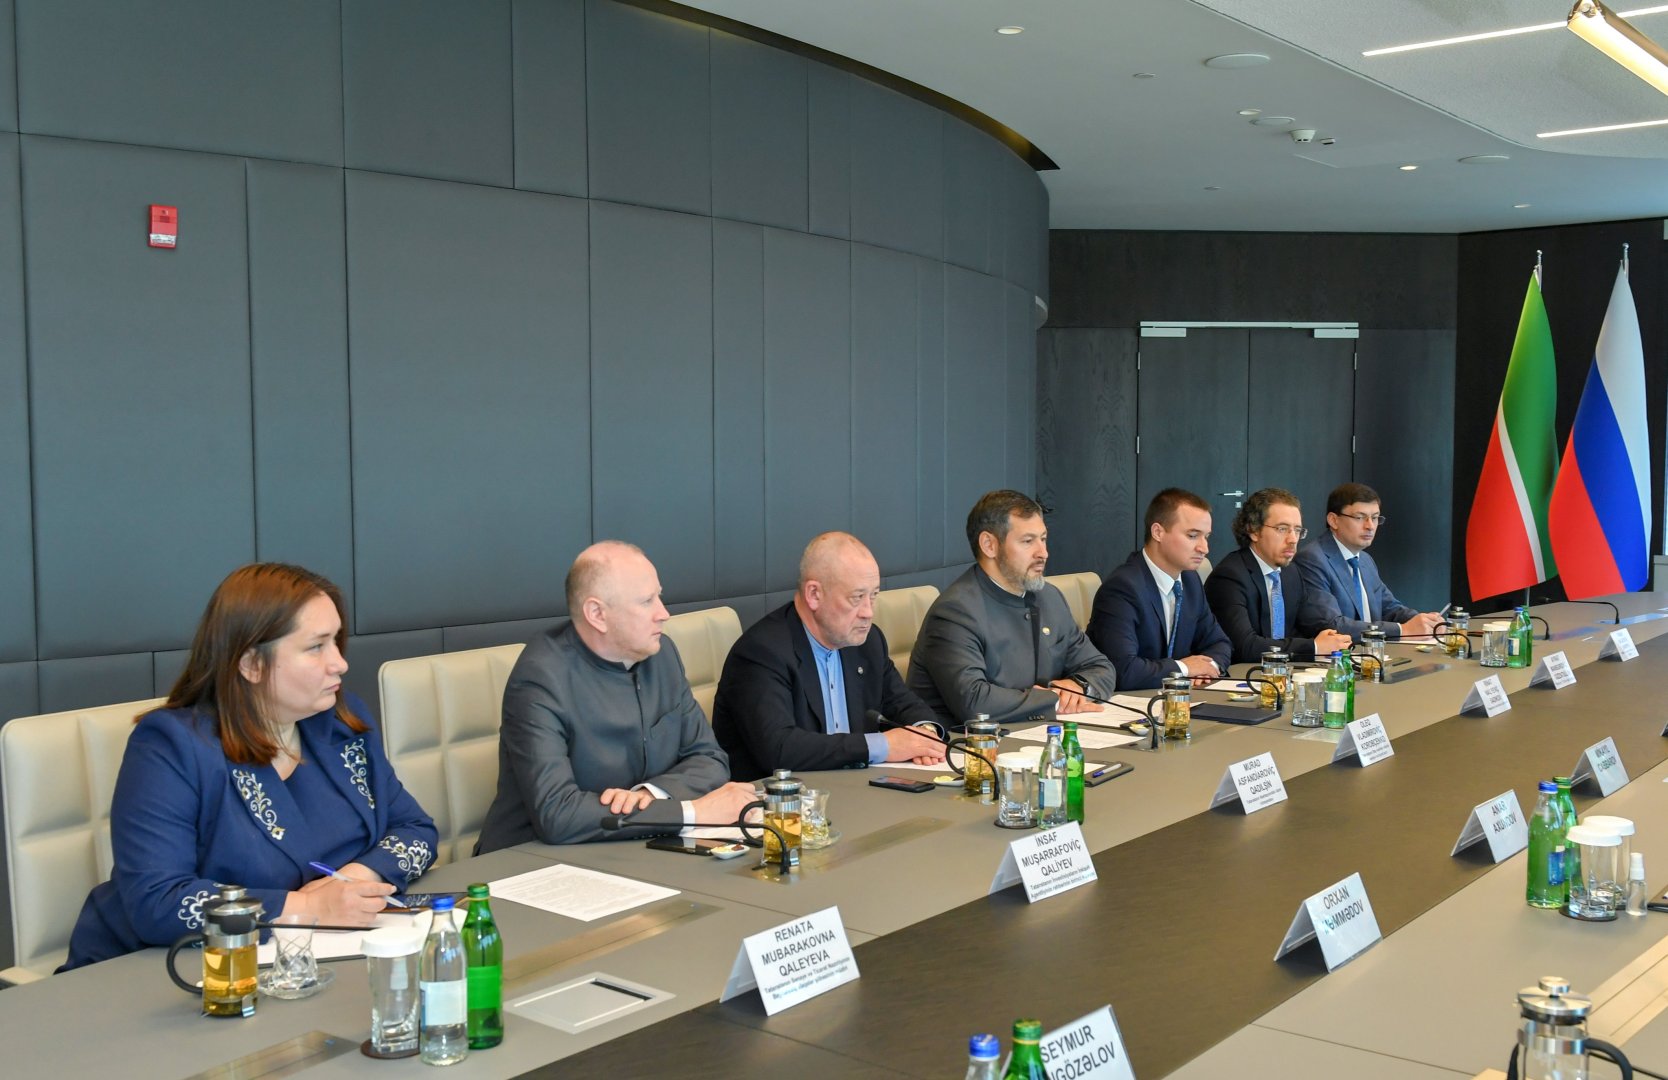 Azerbaijan and Russia's Tatarstan view investment promotion prospects (PHOTO)